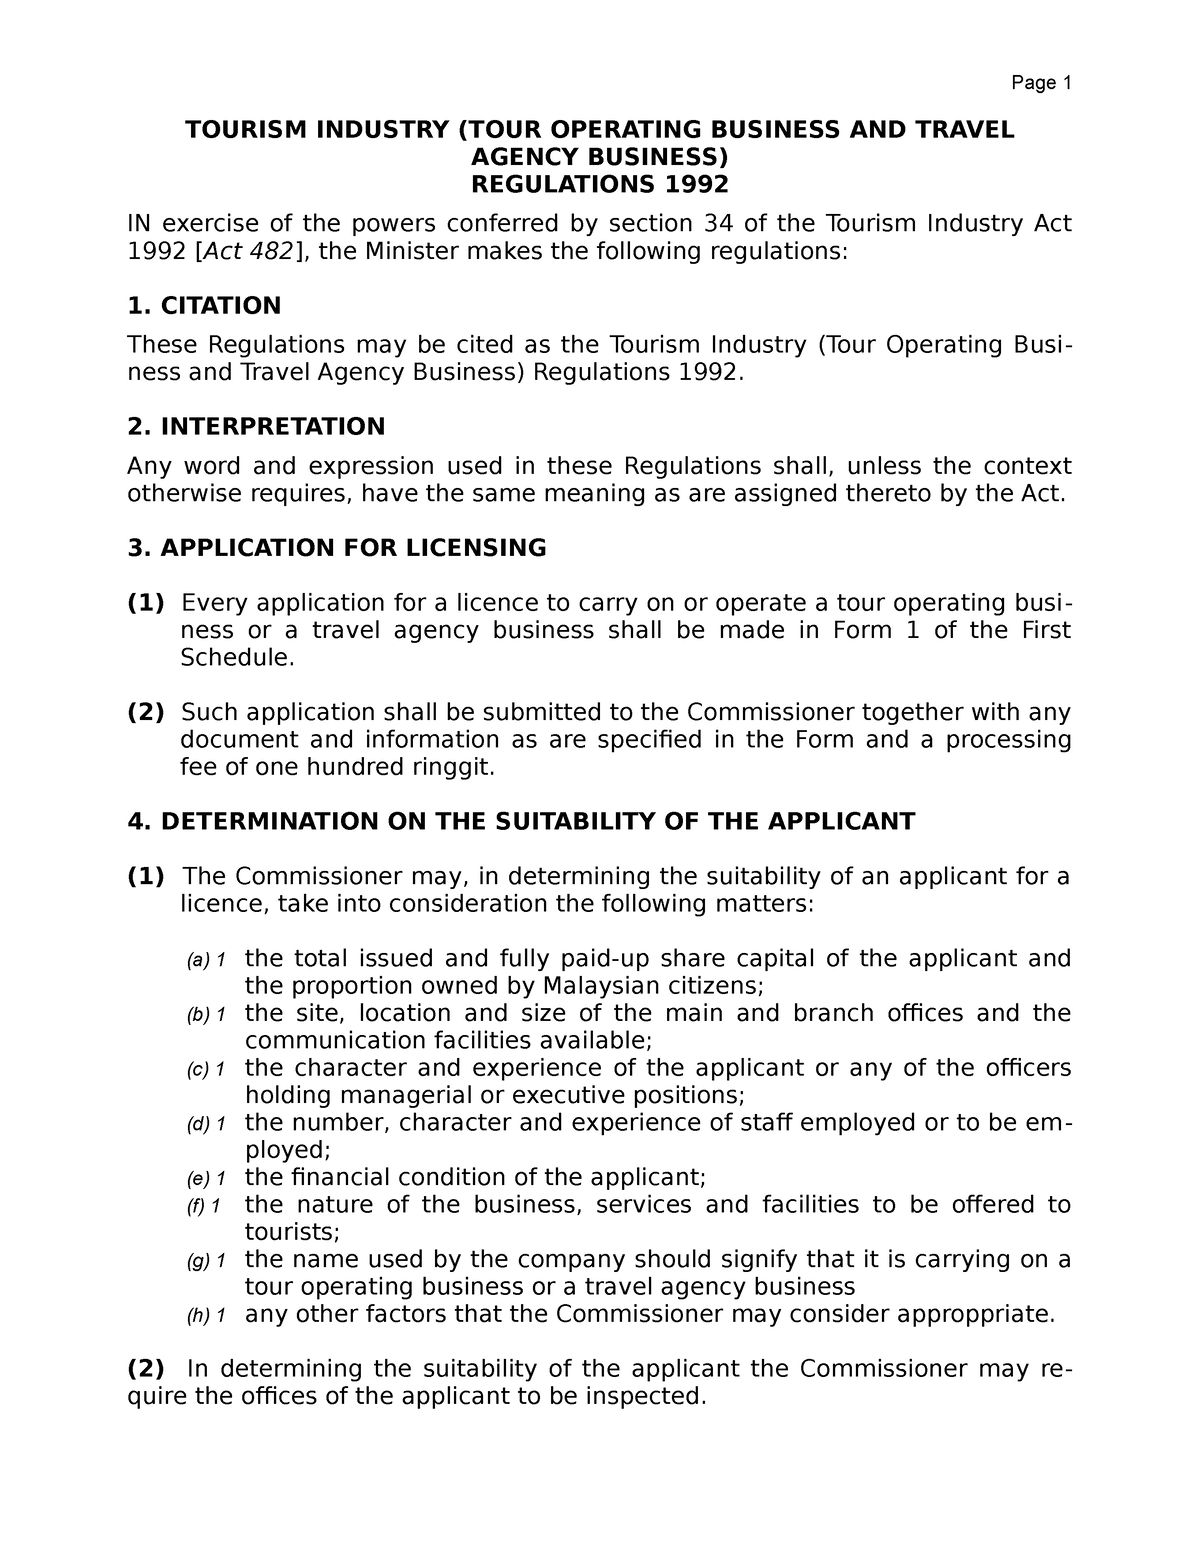 package tour regulations 1992